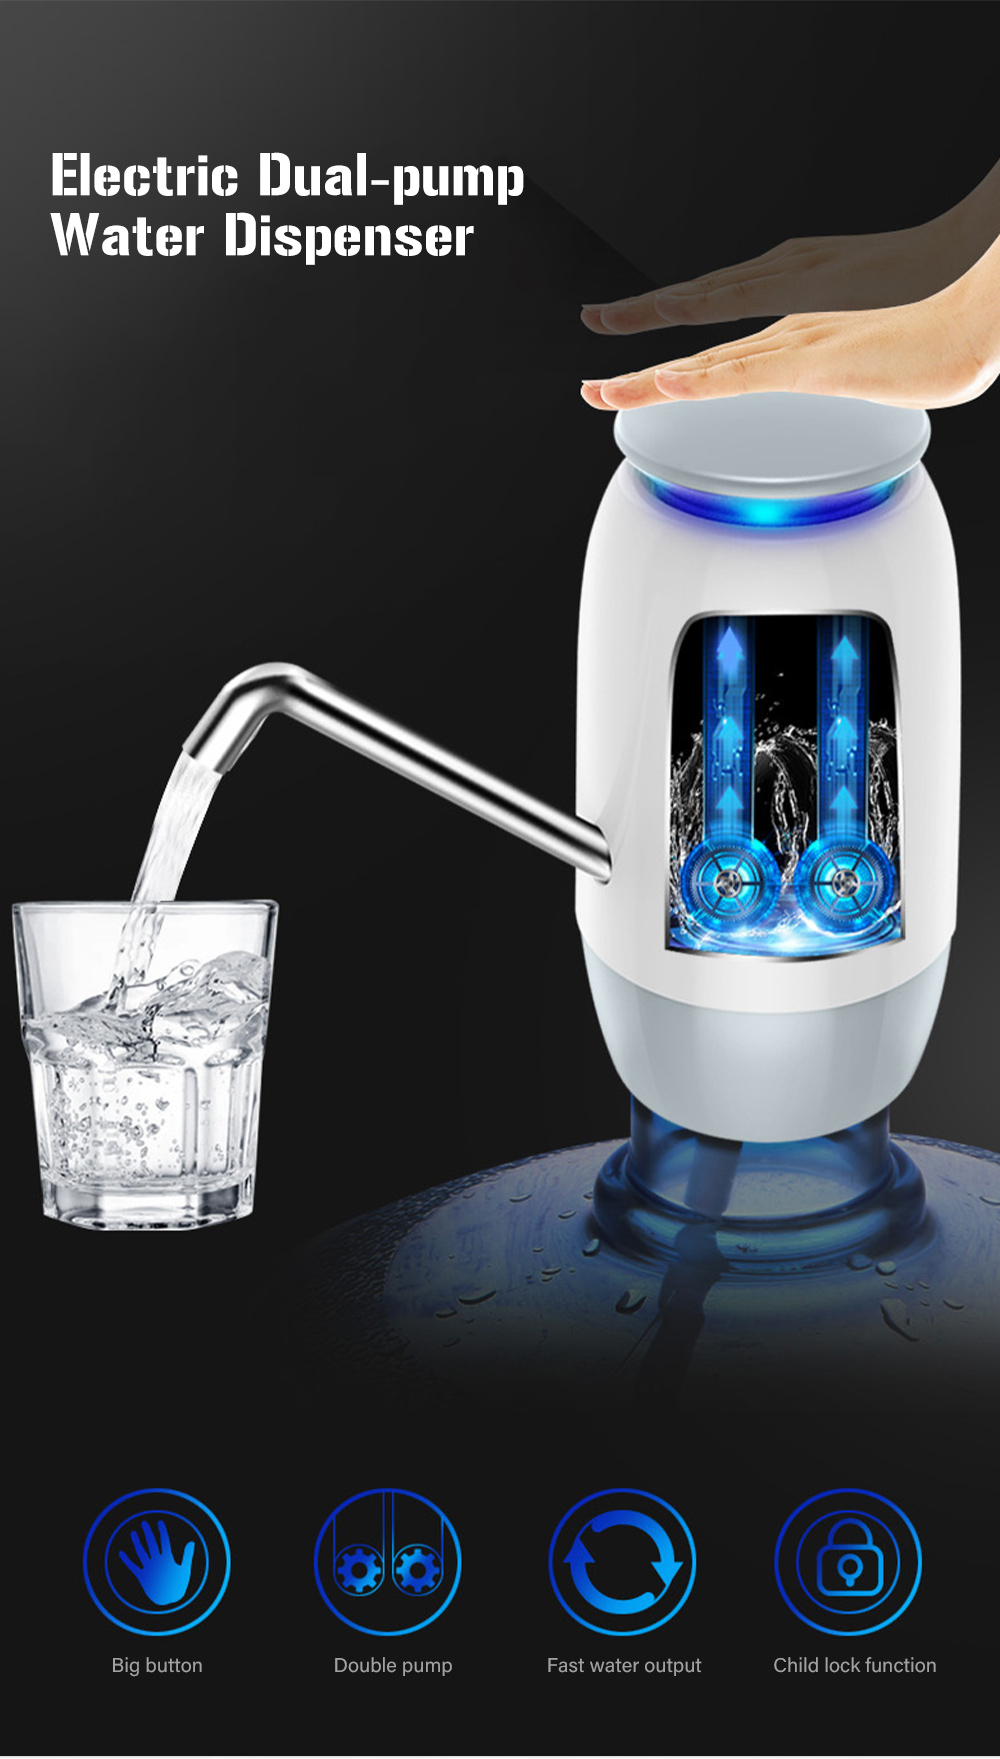 USB Charging Electric Water Dispenser with Dual-pump